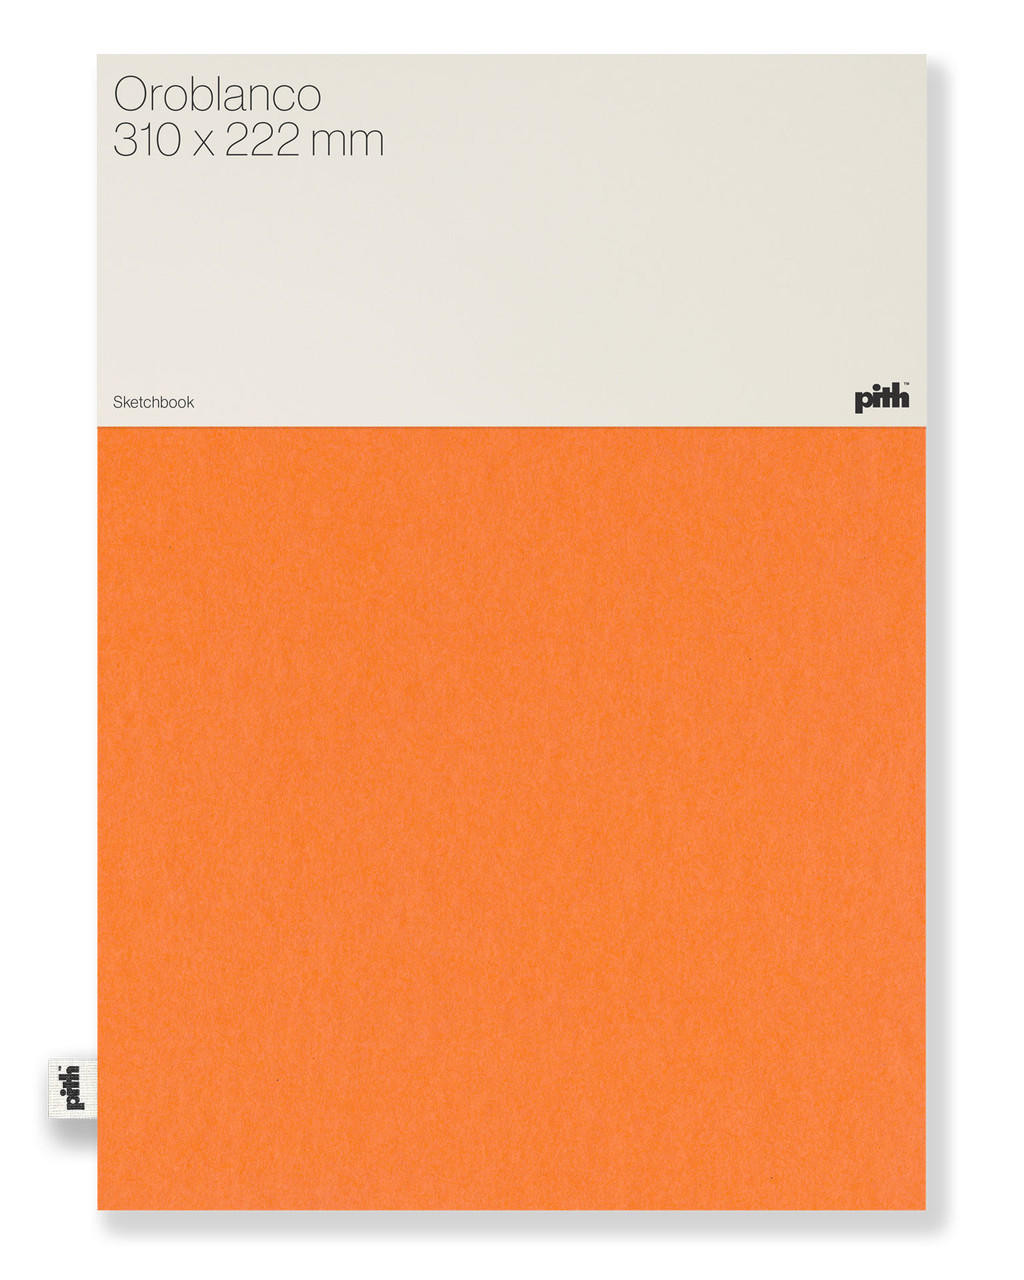 Pith Oroblanco Sketchbook 200gsm 76 Pages 310 X 222mm - Orange